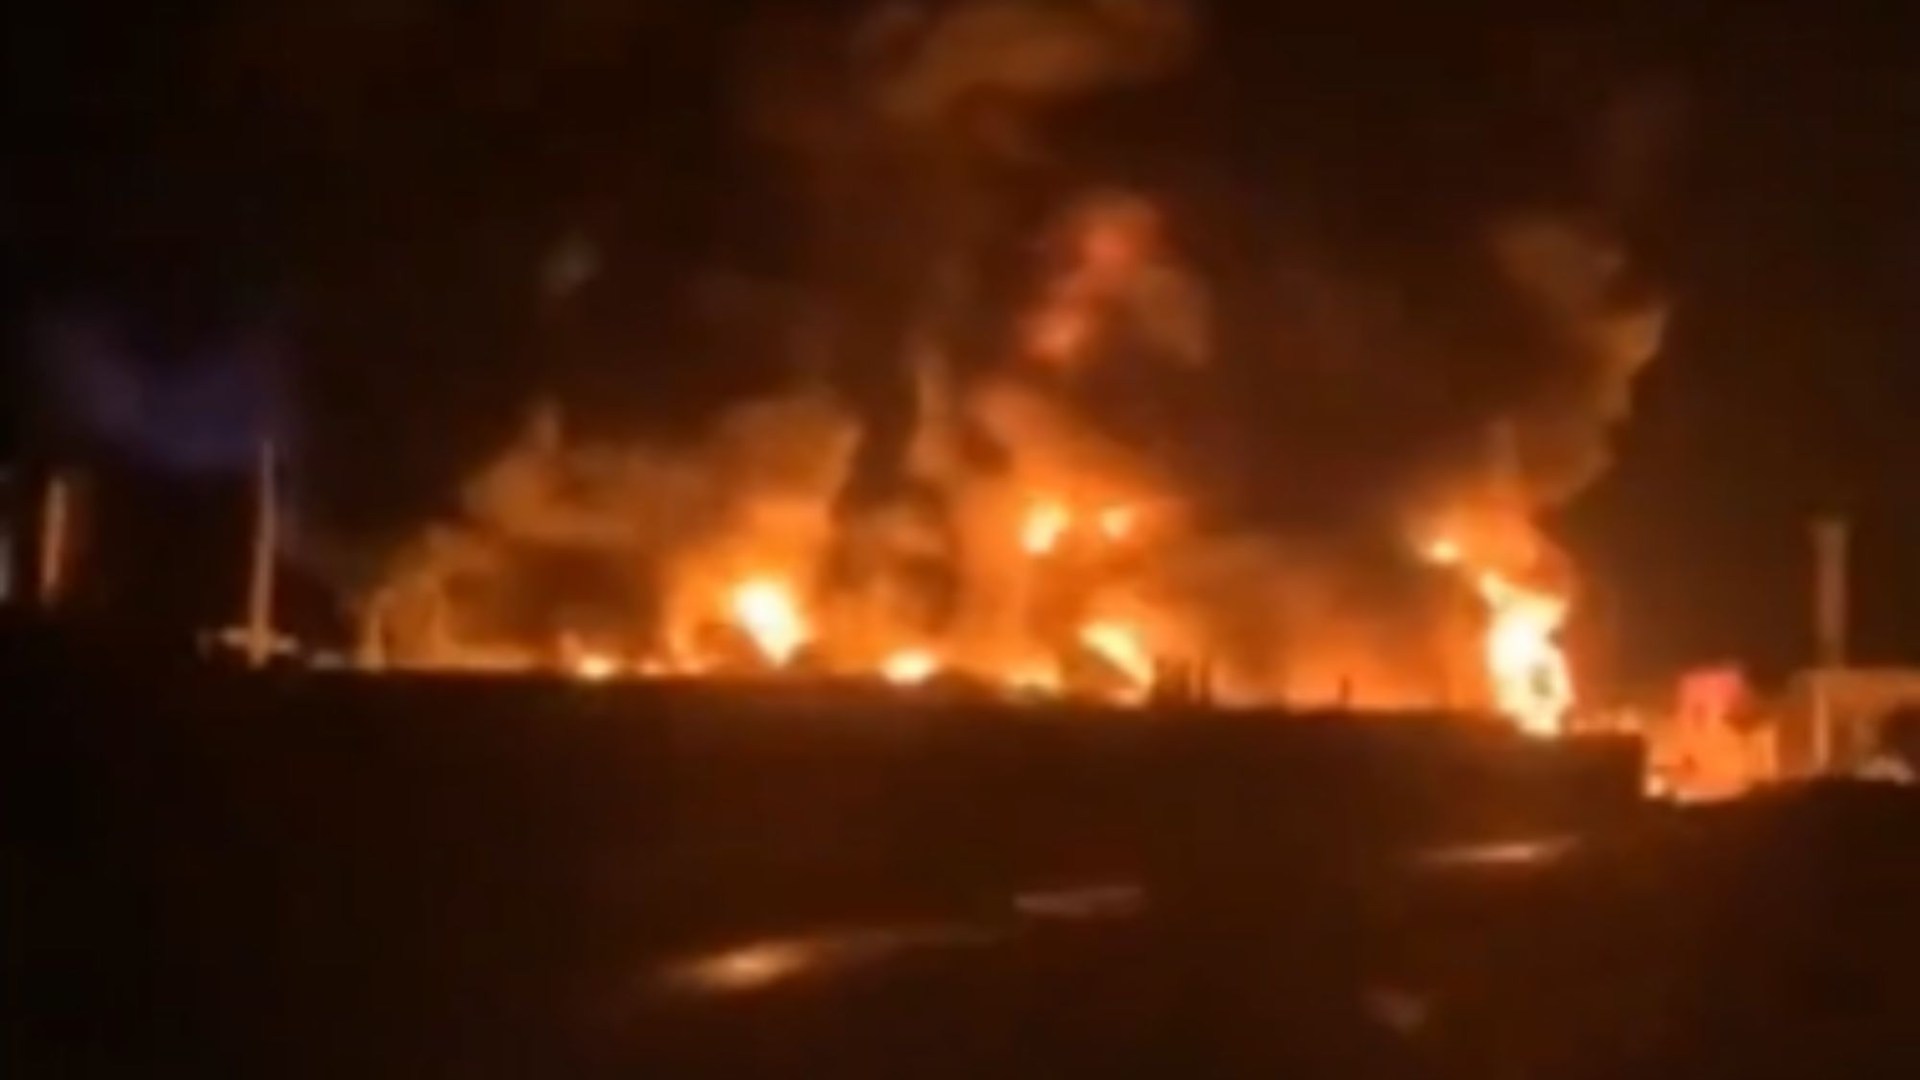 Kamikaze drones blast ANOTHER of Putins oil refineries as massive inferno burns through site 200 miles inside Russia [Video]